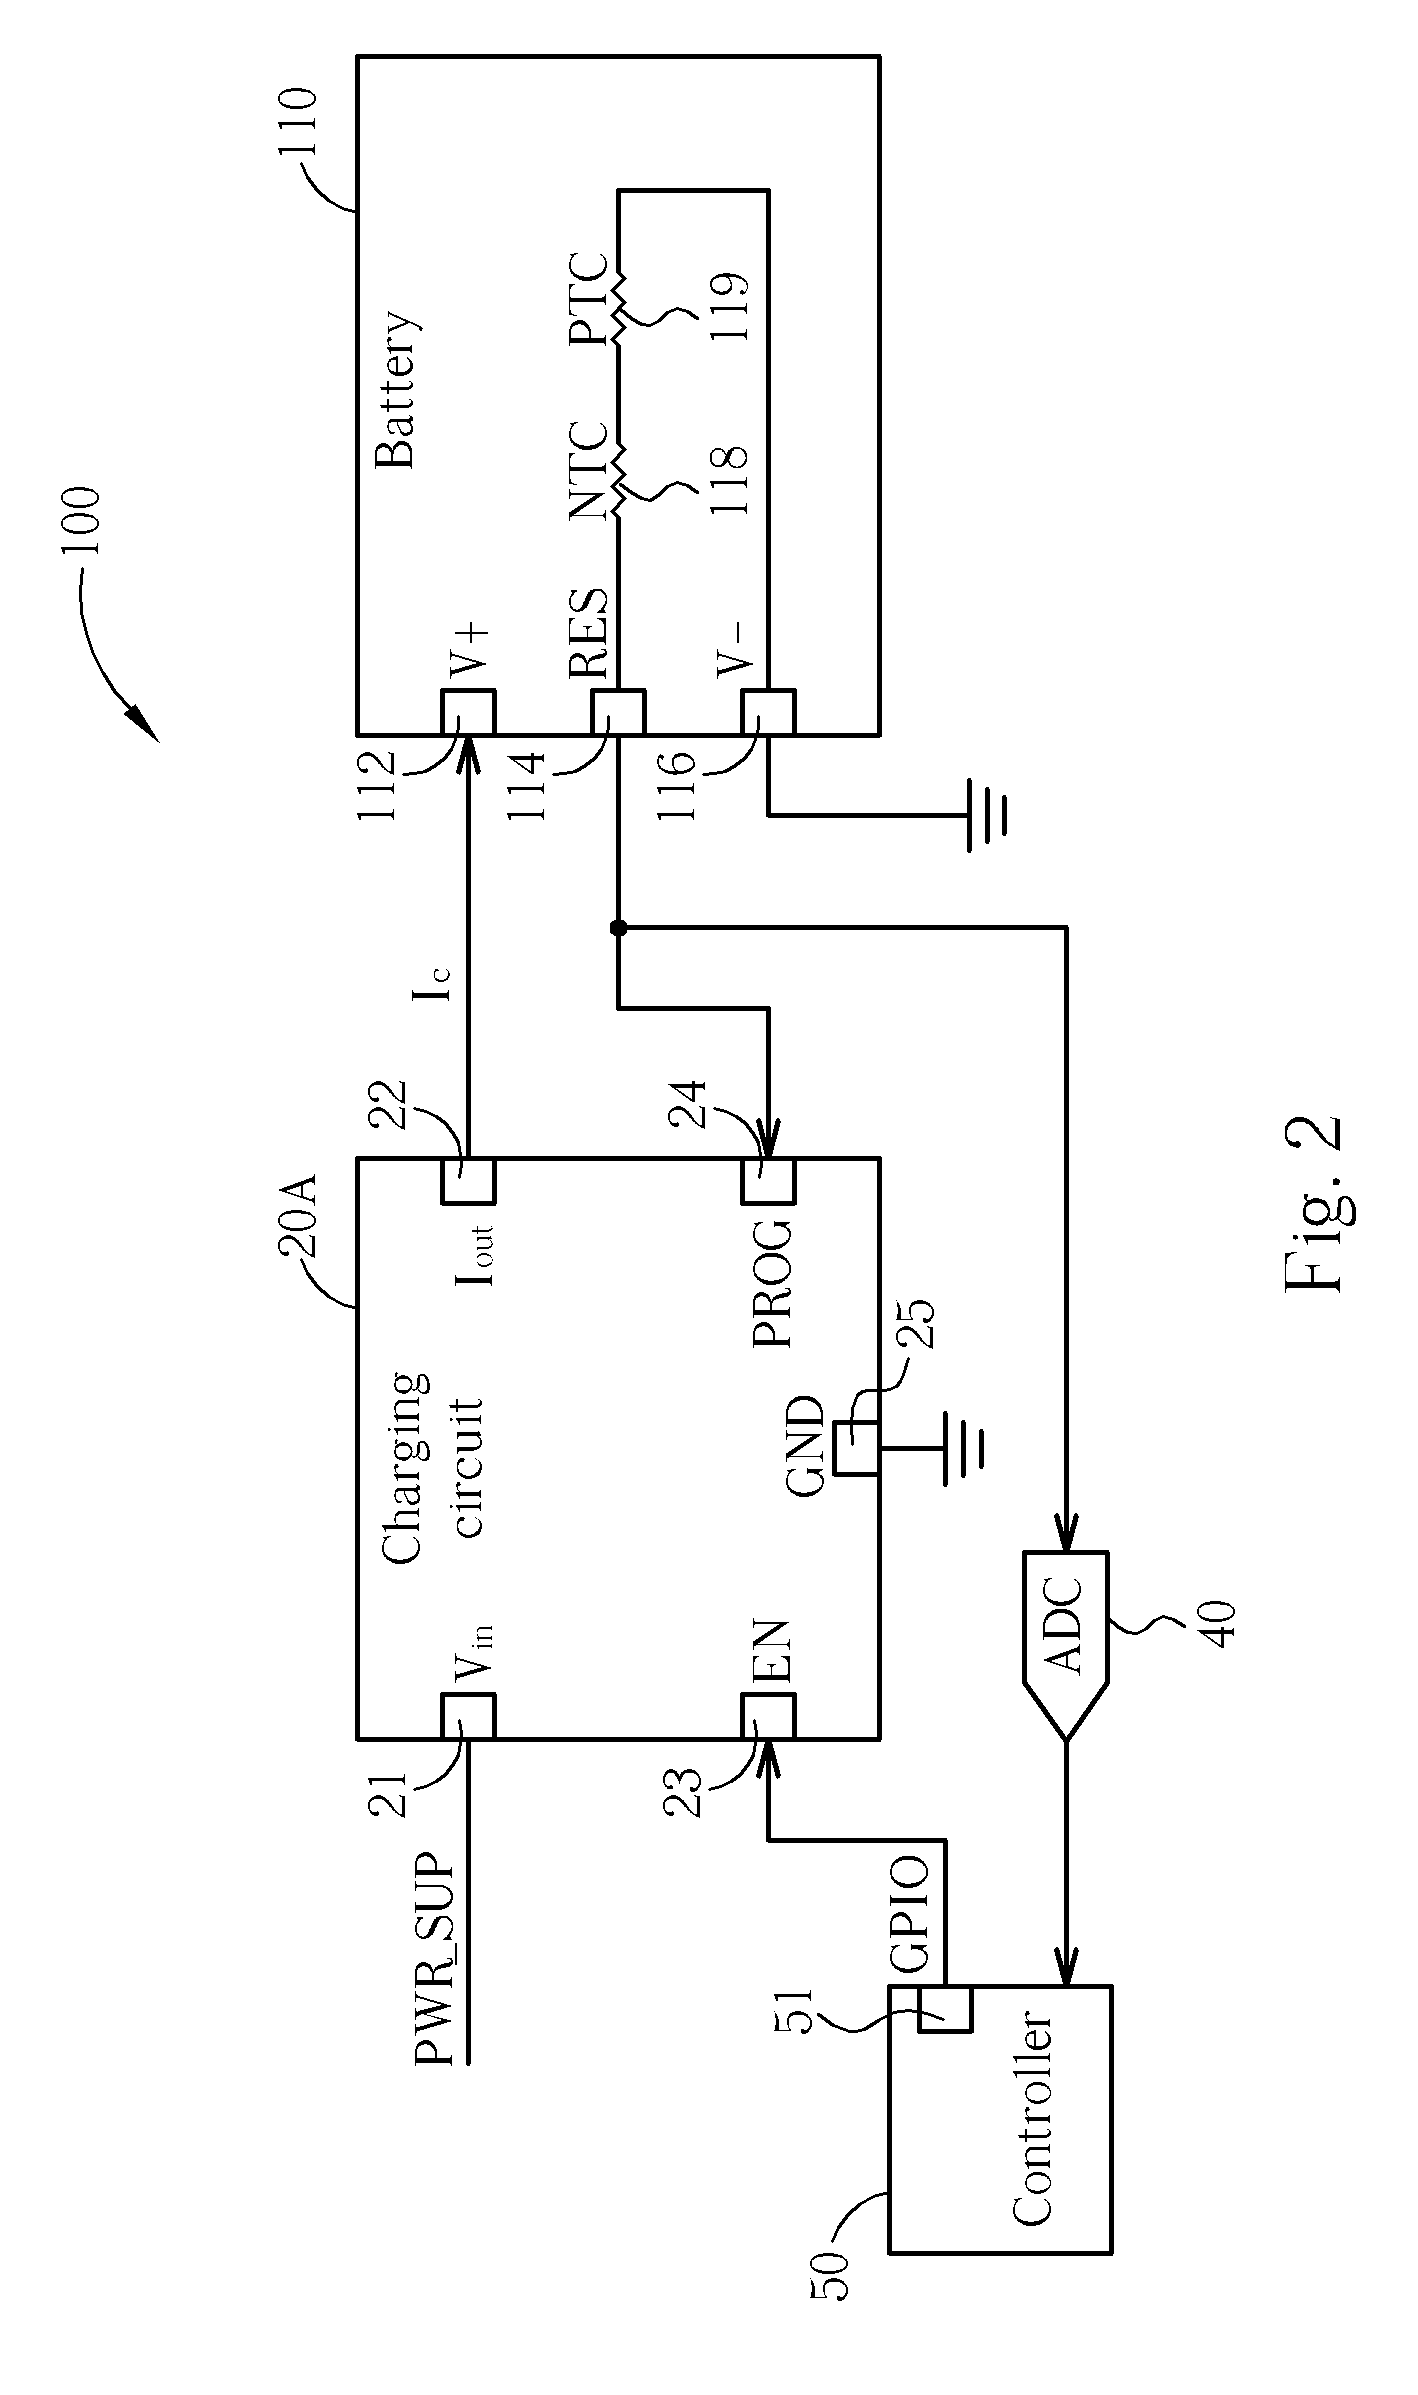 Battery charging system and related method for preventing overheating while charging